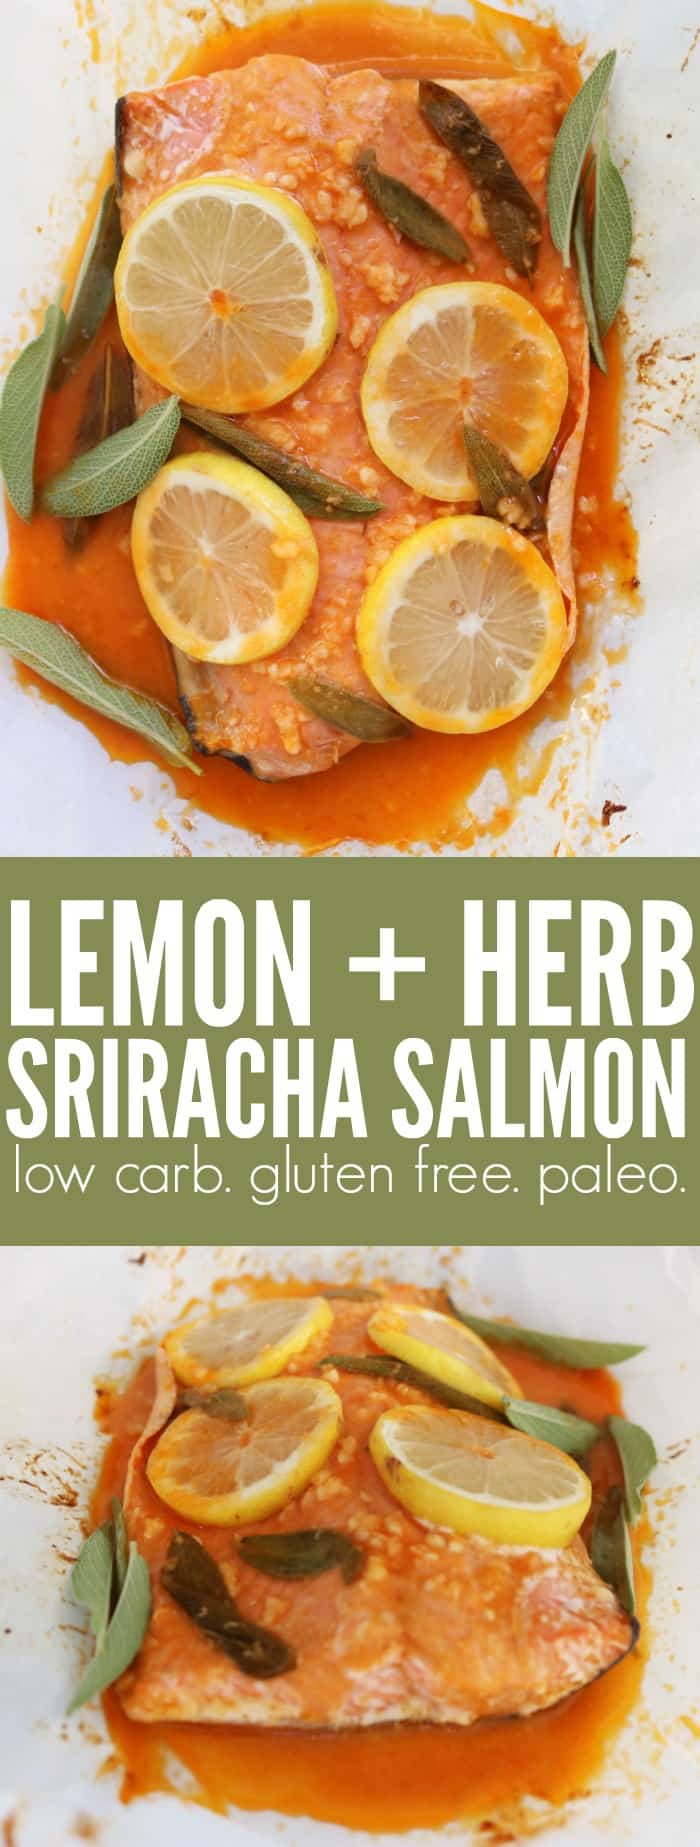 Weeknight dinners don't get easier than this! You'll love this flavor packed Lemon + Herb Sriracha Salmon!! A perfect low carb, gluten free, and paleo meal! thetoastedpinenut.com #lowcarb #glutenfree #dinner